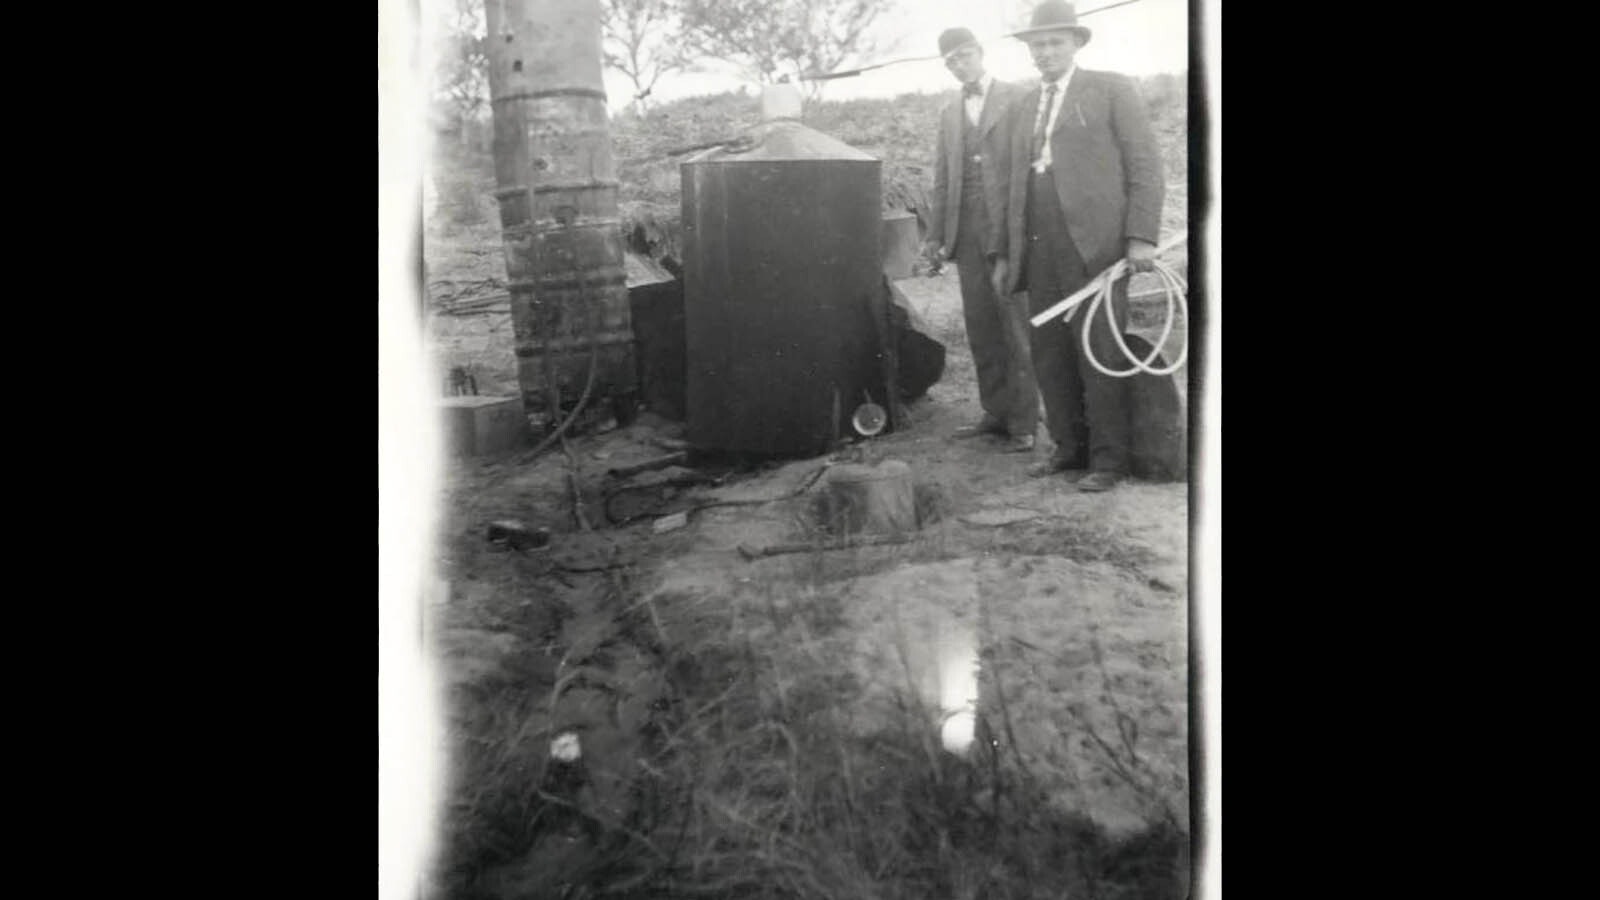 Agents stand beside a still, seized in a raid.